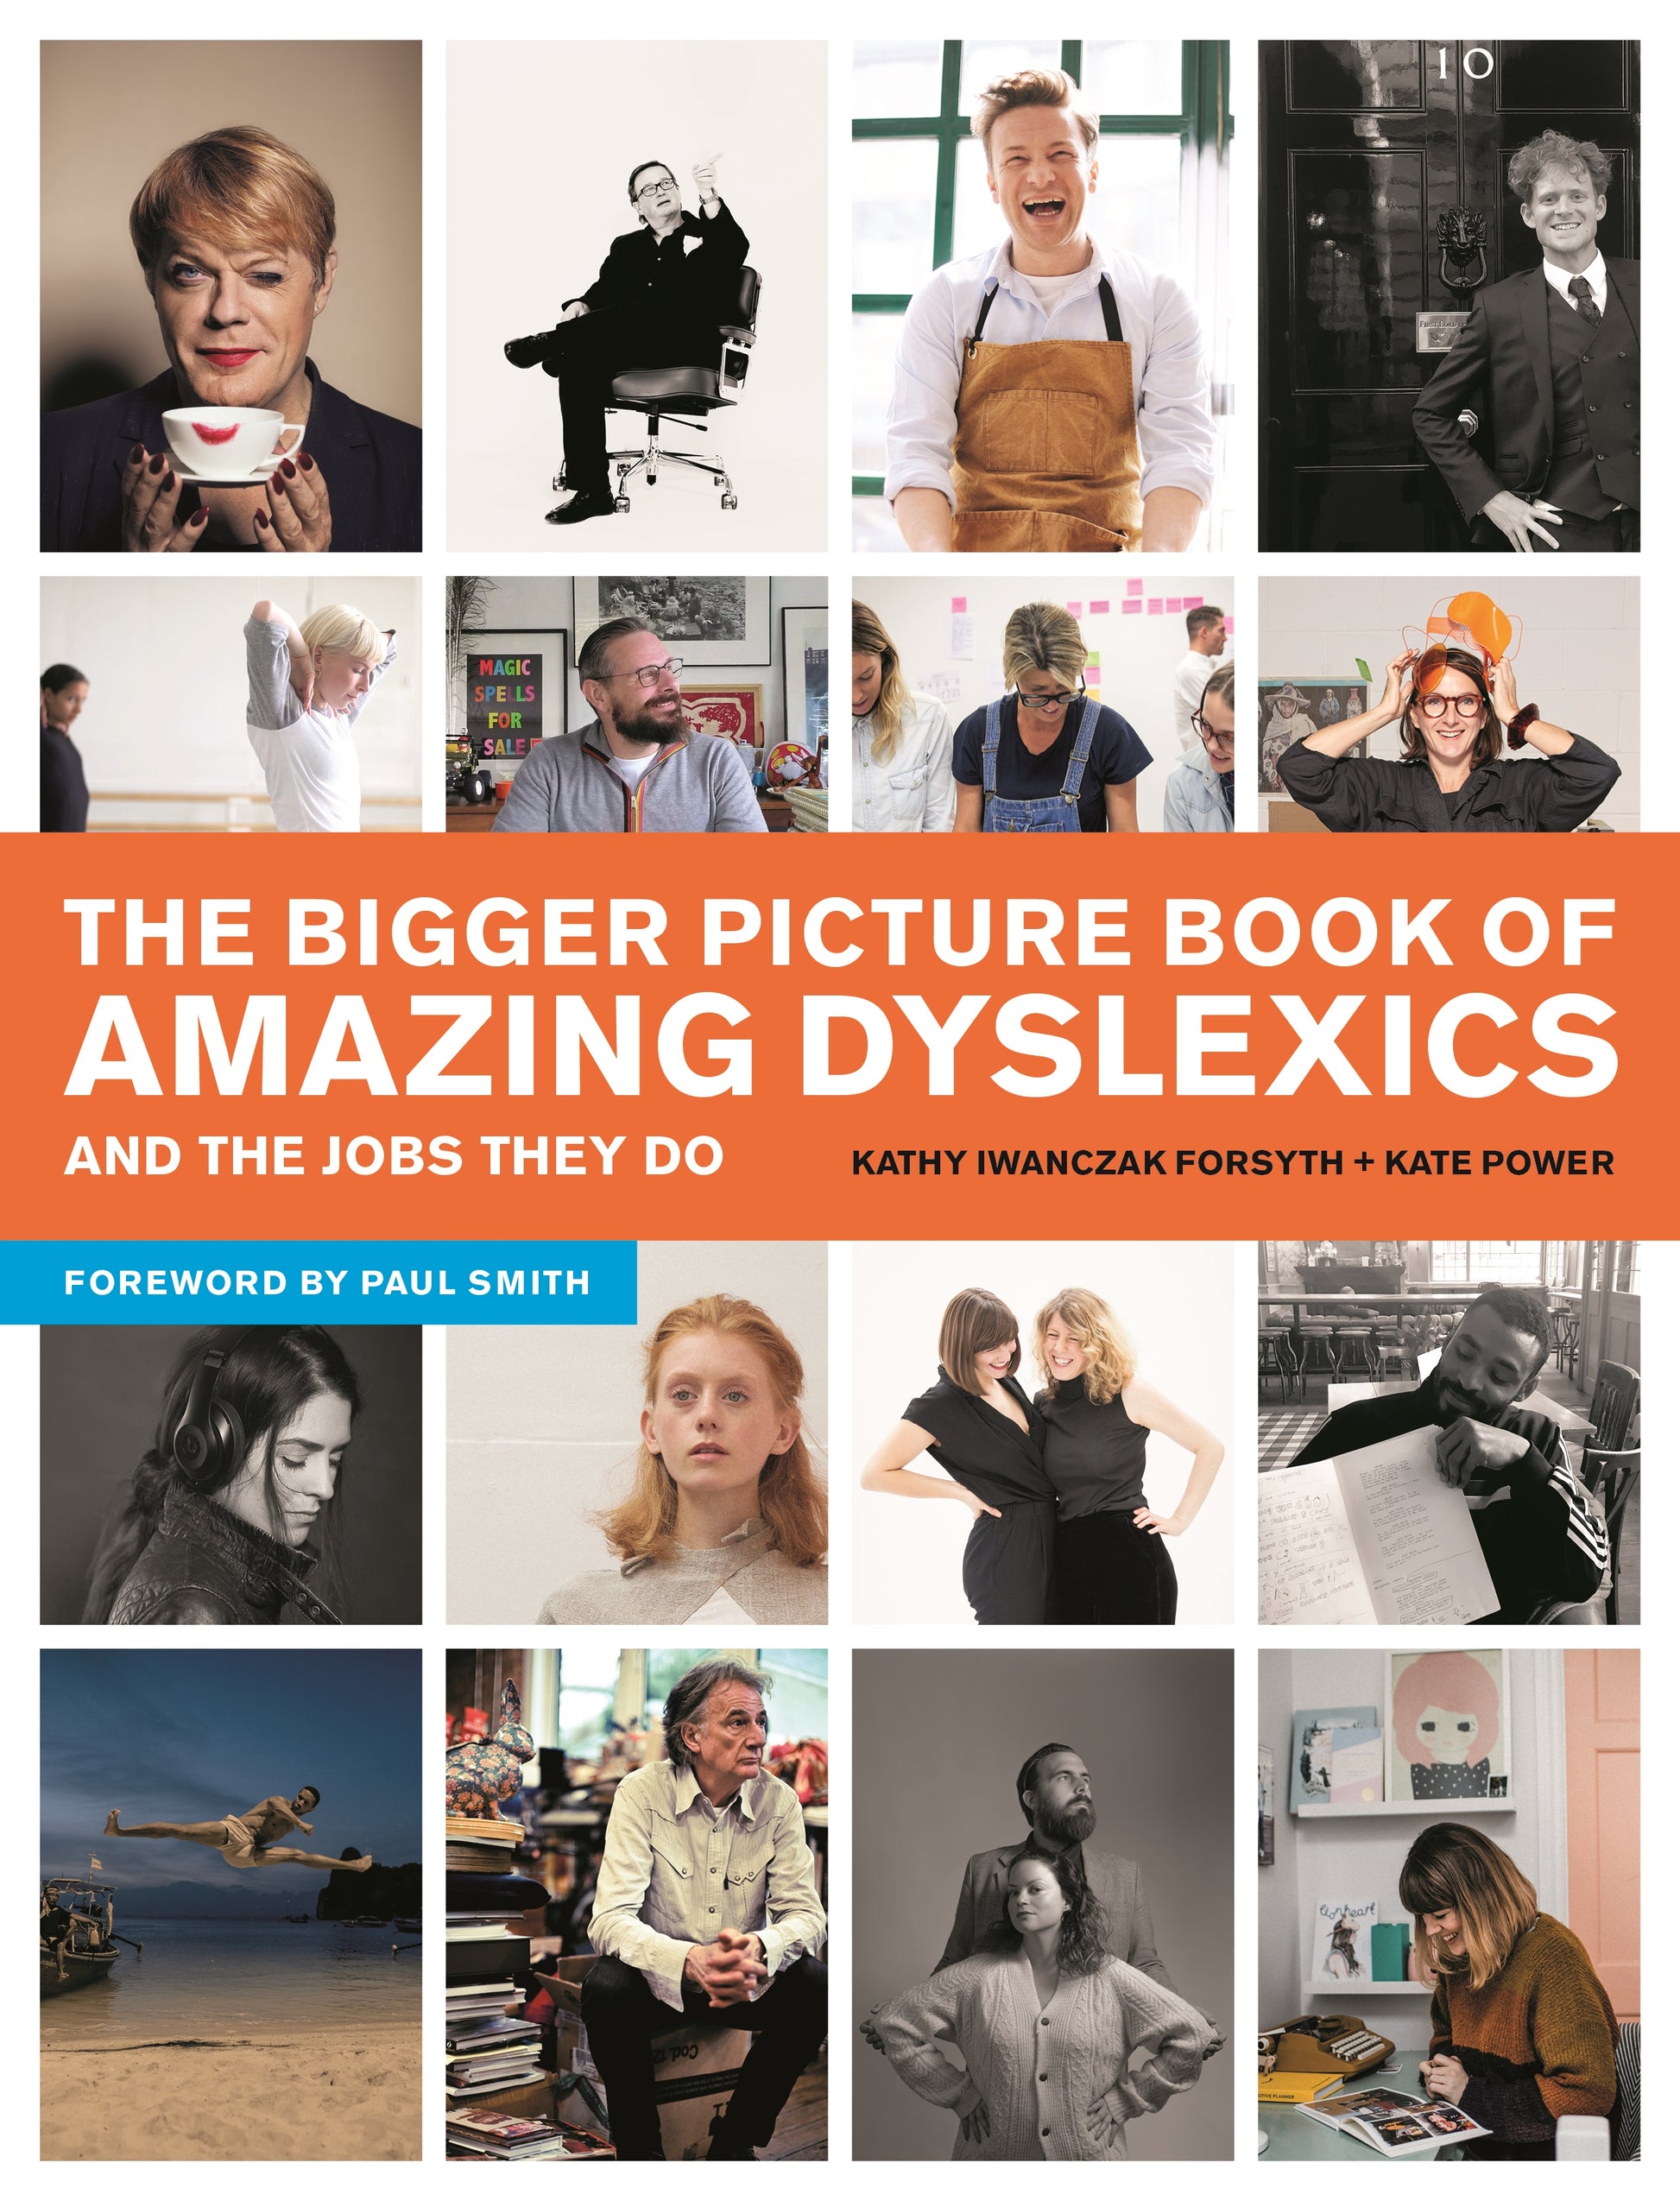 The Bigger Picture Book of Amazing Dyslexics and the Jobs They Do by Kate Power, Kathy Iwanczak Forsyth, Paul Smith